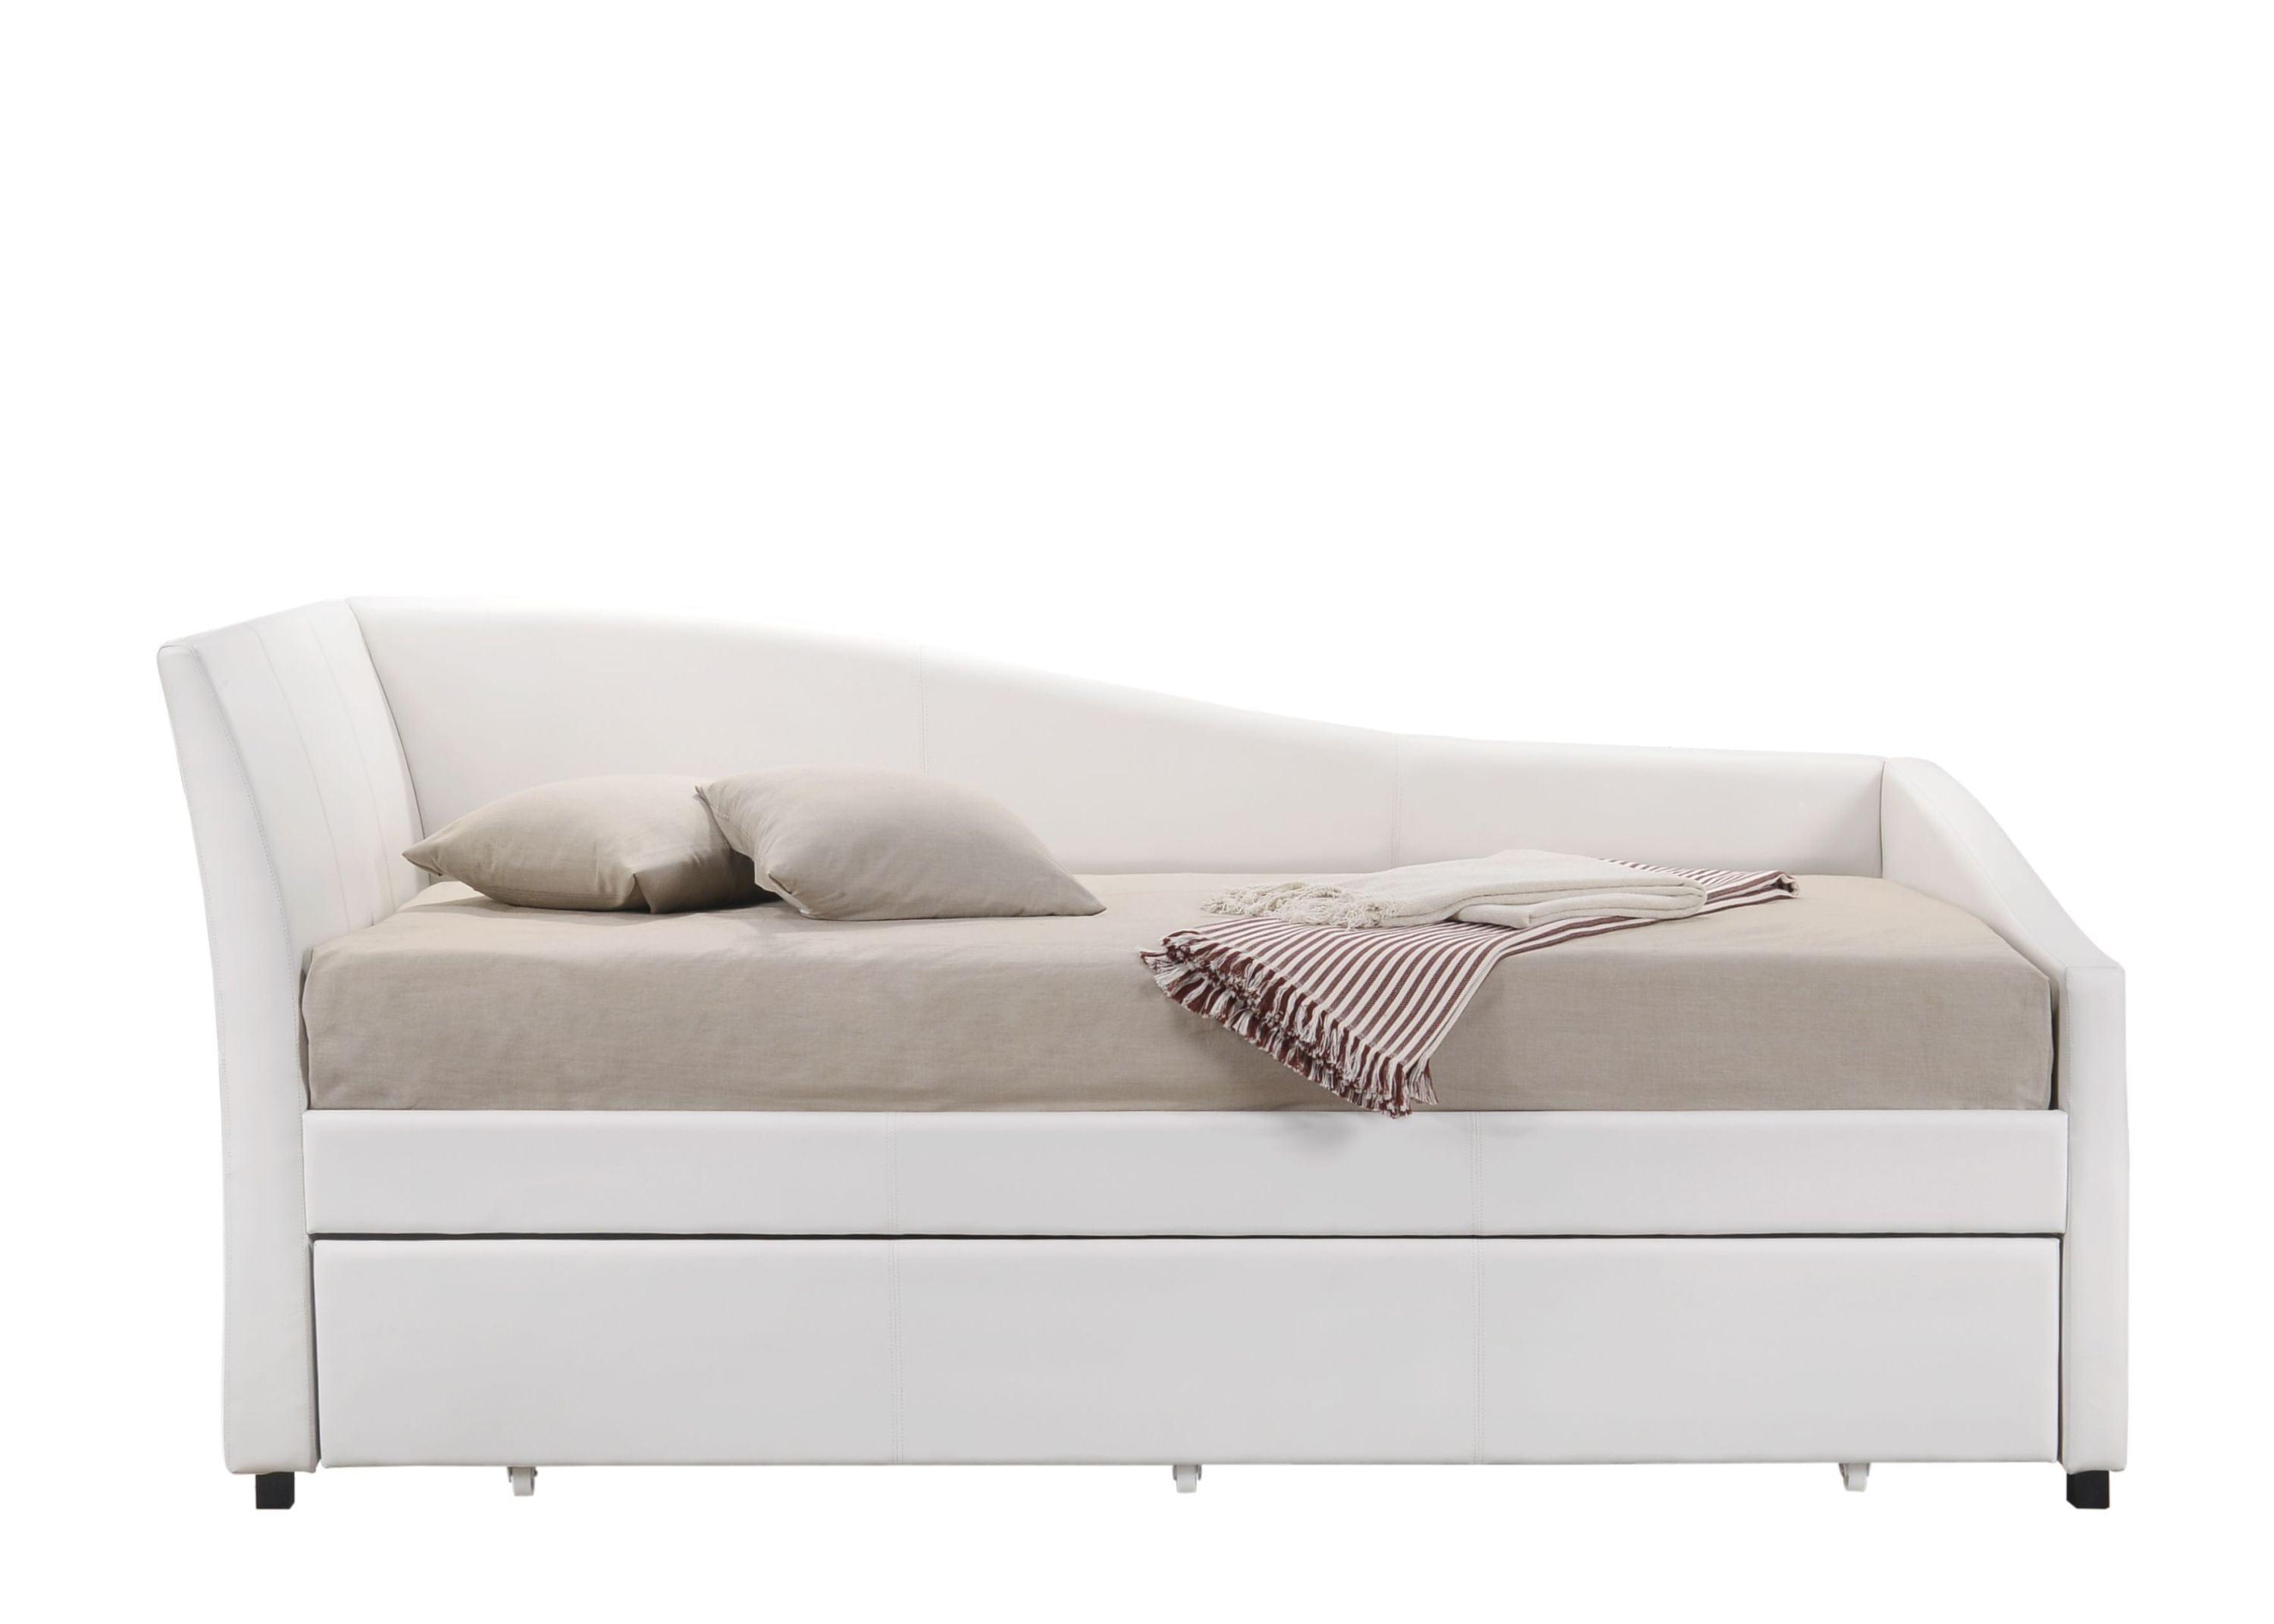 Shop ACME Jedda Daybed & Trundle (Twin Size), White PU (1Set/3Ctn) 39400 Mademoiselle Home Decor